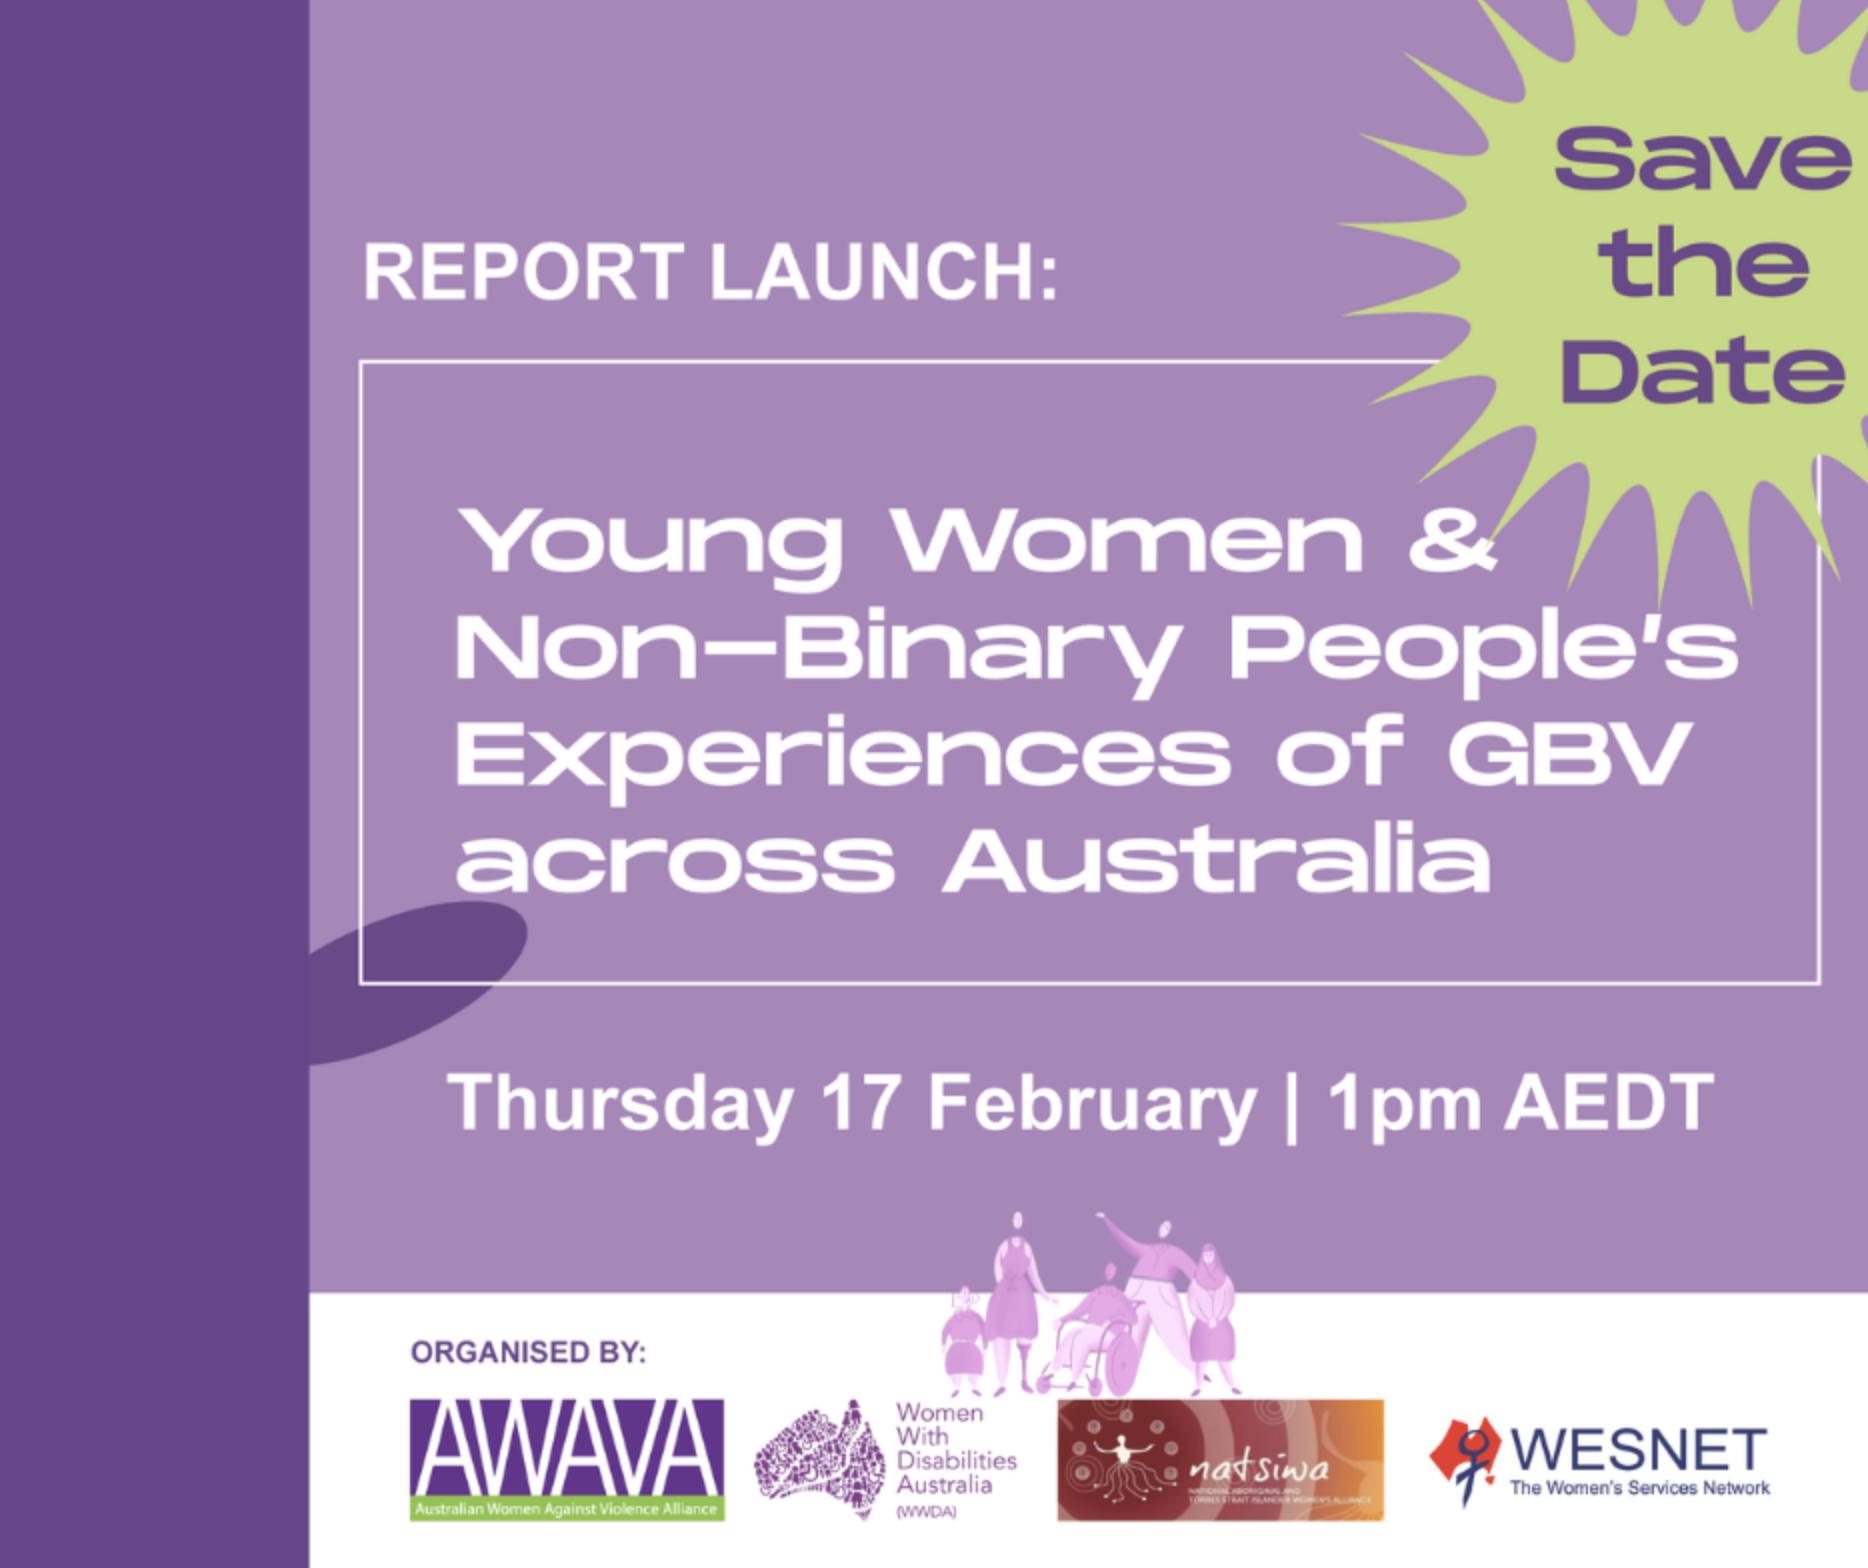 Purple background with the text ‘Report Launch: Young Women & Non-Binary People’s Experiences of GBV across Australia. Thursday 17 February 1pm AEDT’. A light green flower on the right with a purple text inside saying “Save the date”. An purple image of people at the bottom with the logos of AWAVA, WWDA, NATSIWA and WESTNET